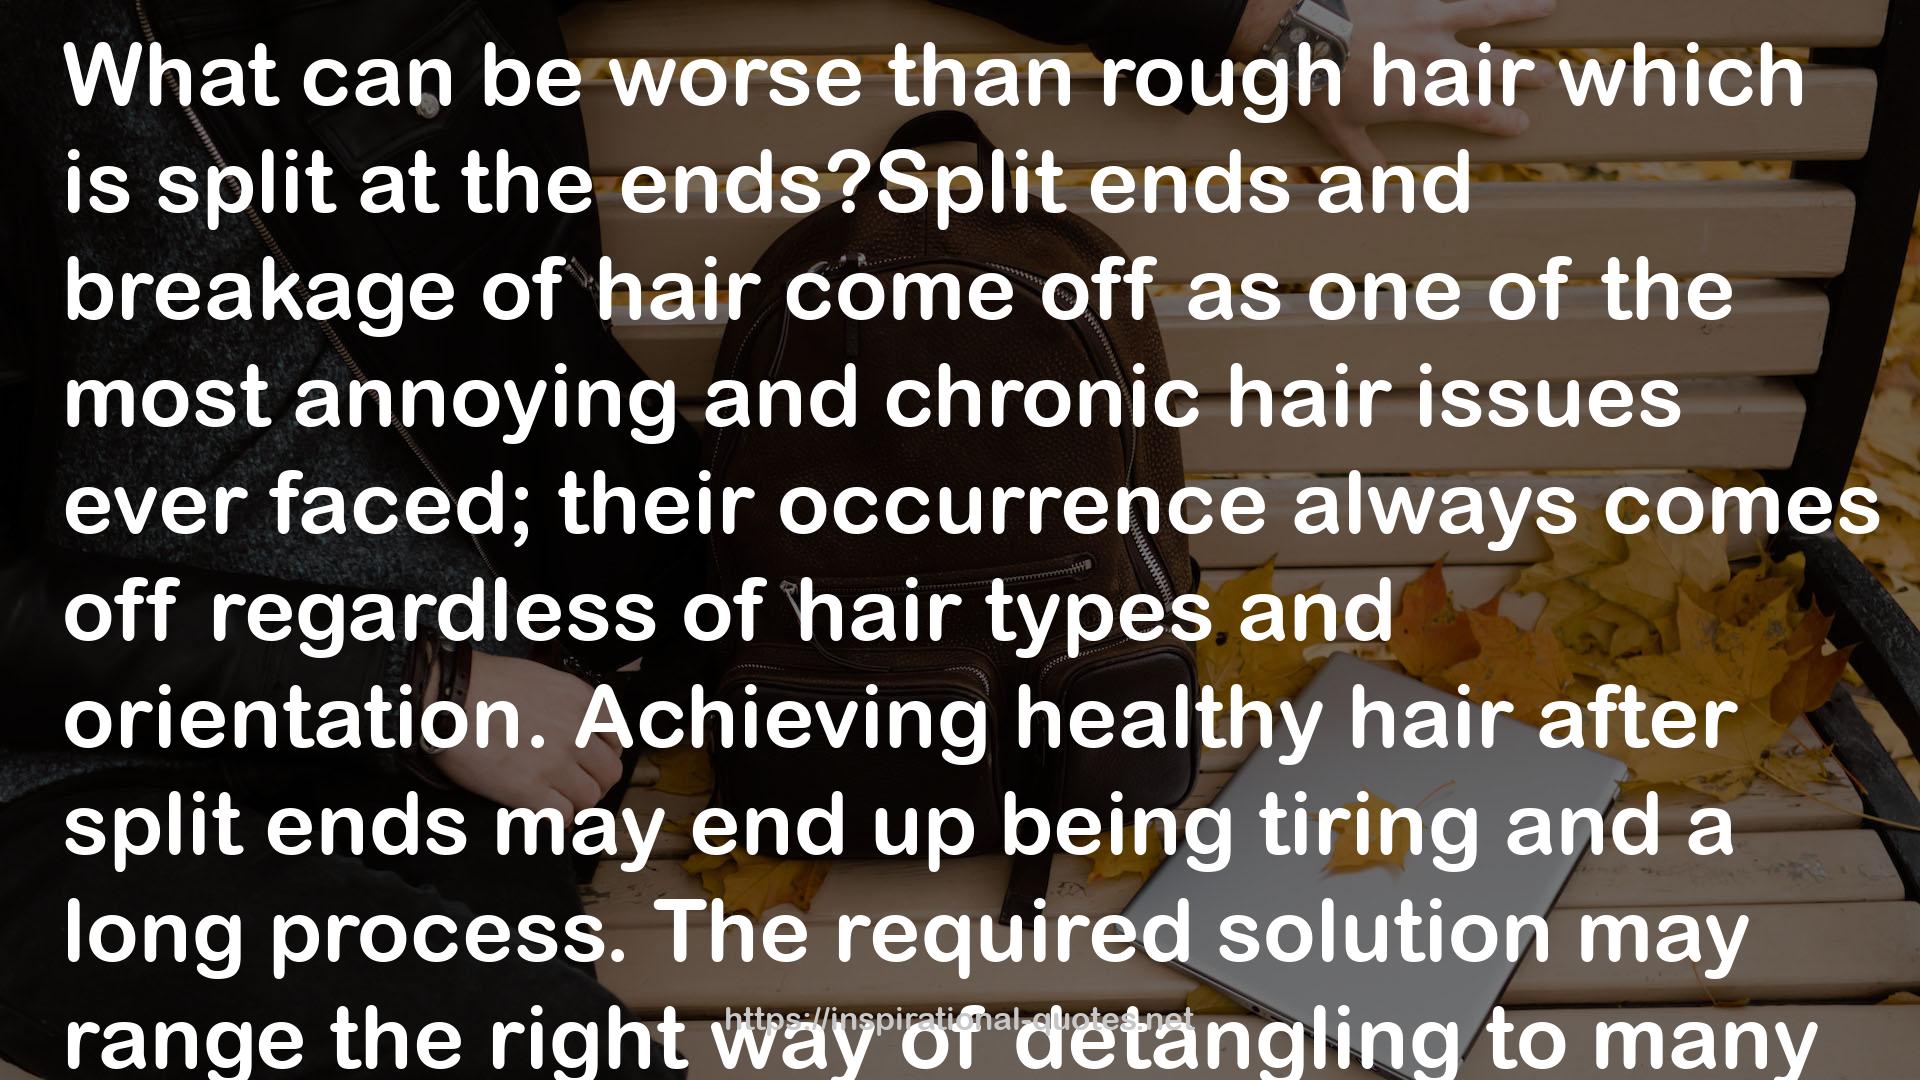 HOW DO I KEEP MY SCALP CLEAN AND HEALTHY? QUOTES